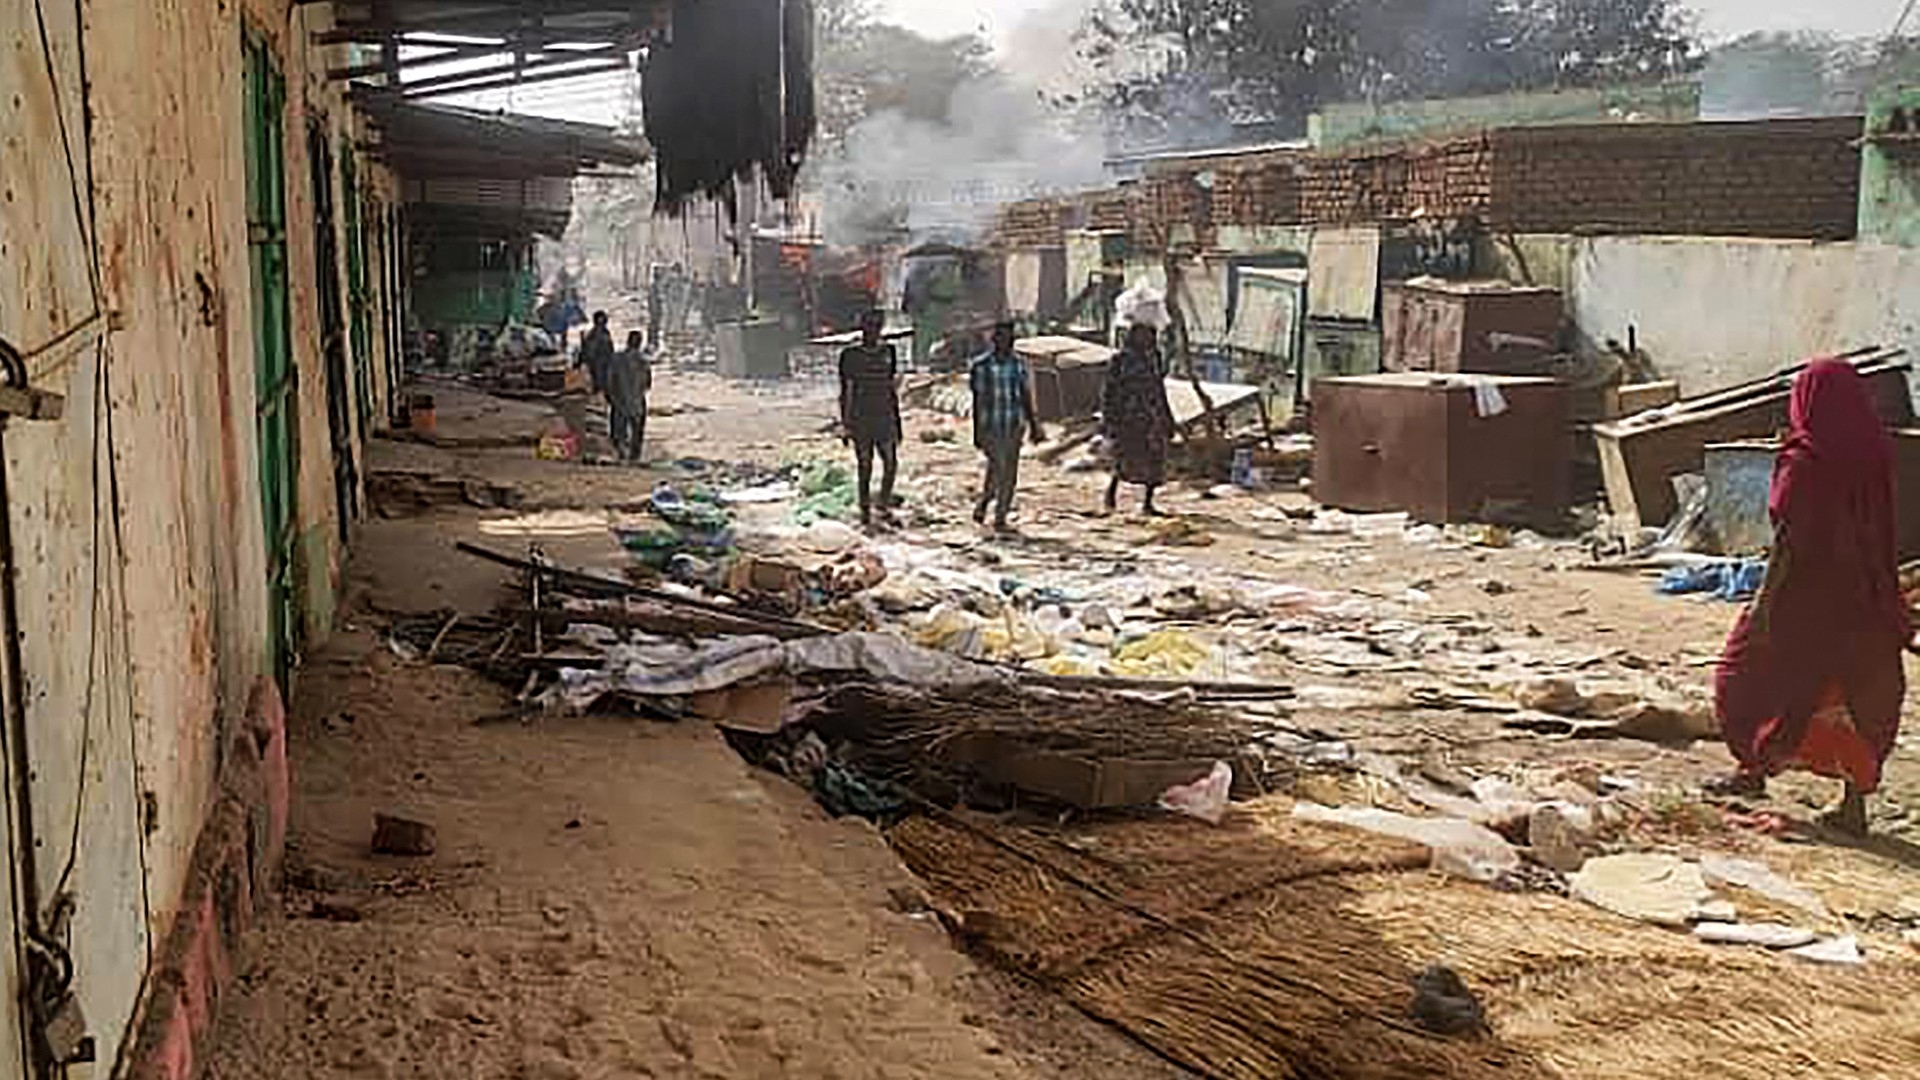 People walk among scattered objects in the market of el-Geneina, the capital of West Darfur, as fighting unfolded in Sudan on 29 April 2023 (AFP)